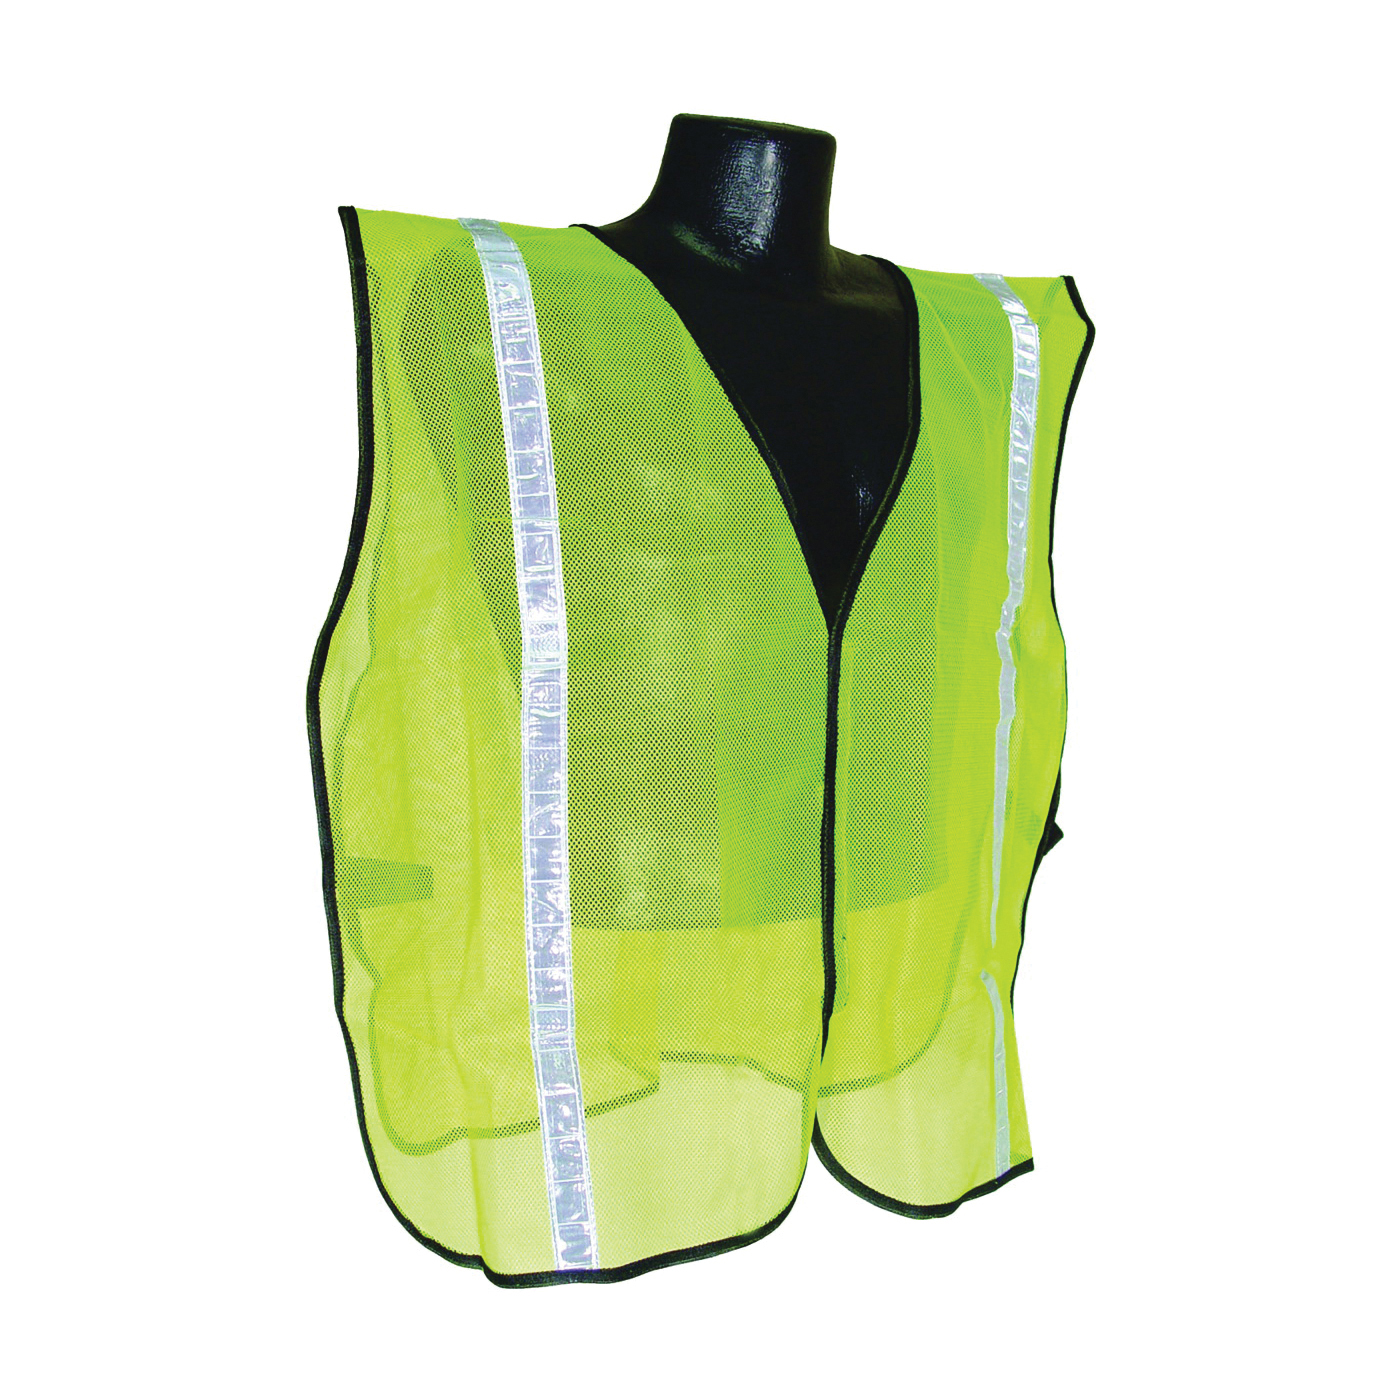 SVG1 Non-Rated Safety Vest, S/XL, Polyester, Green/Silver, Hook-and-Loop Closure